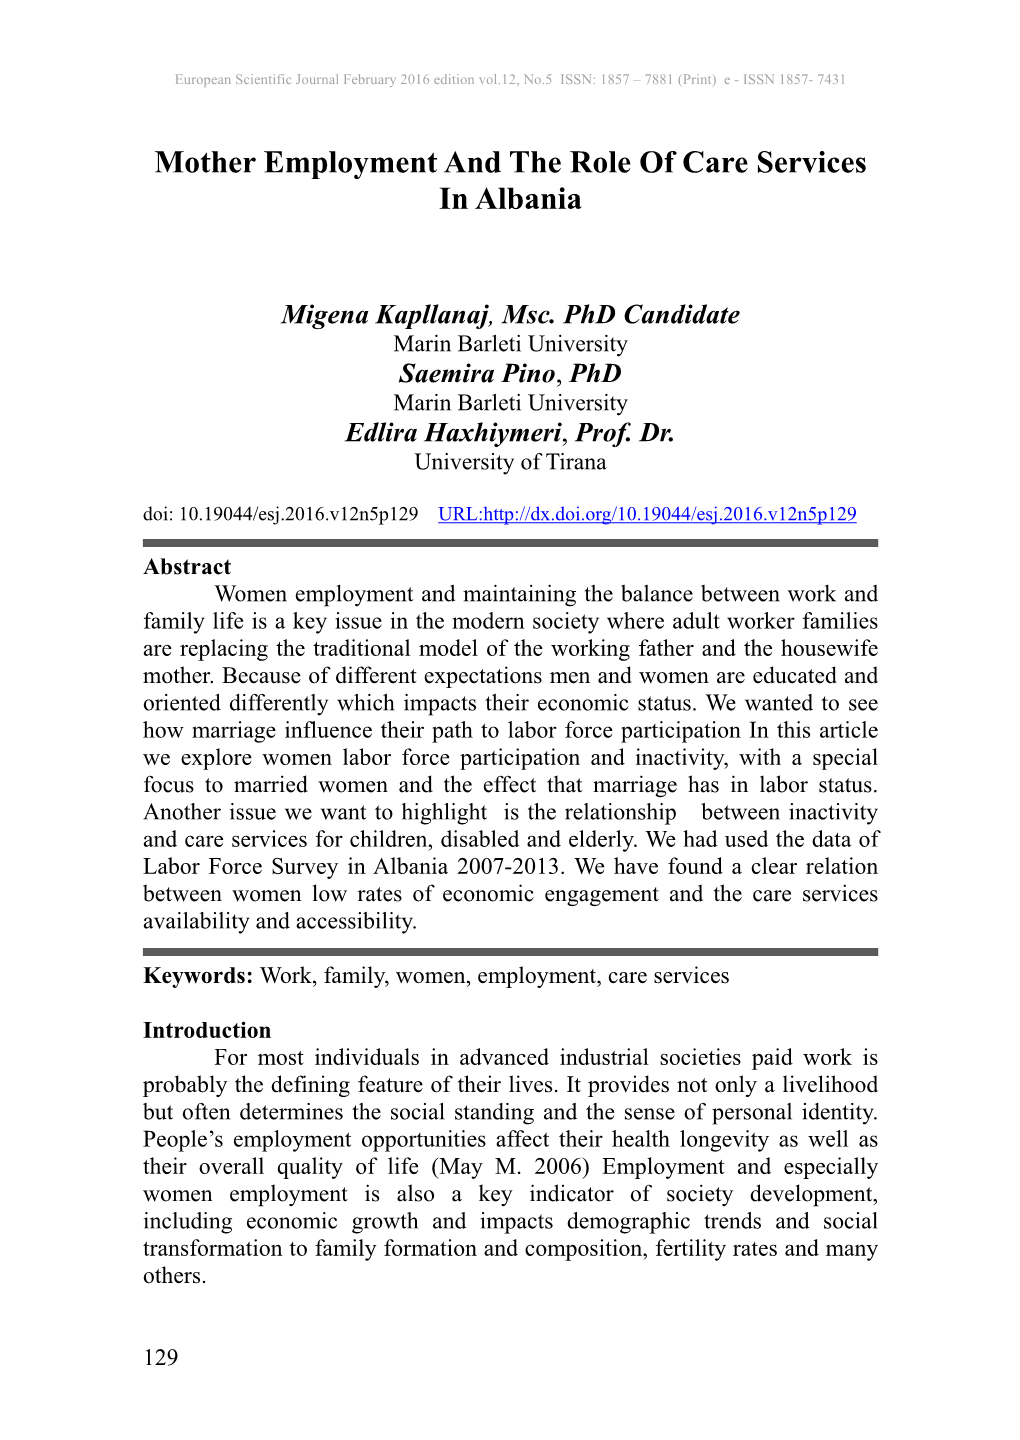 Mother Employment and the Role of Care Services in Albania